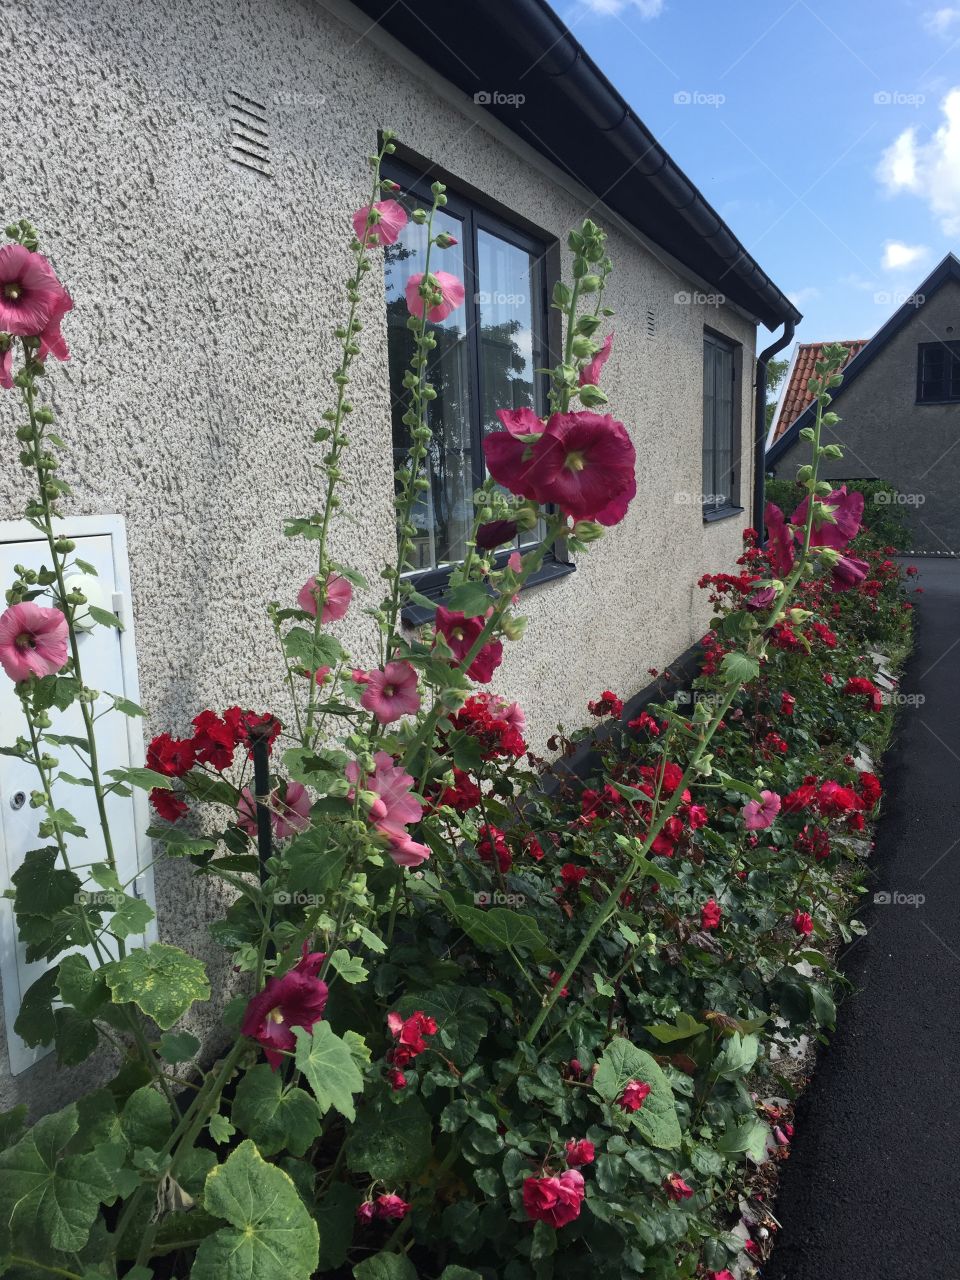 Flowers against a house wall